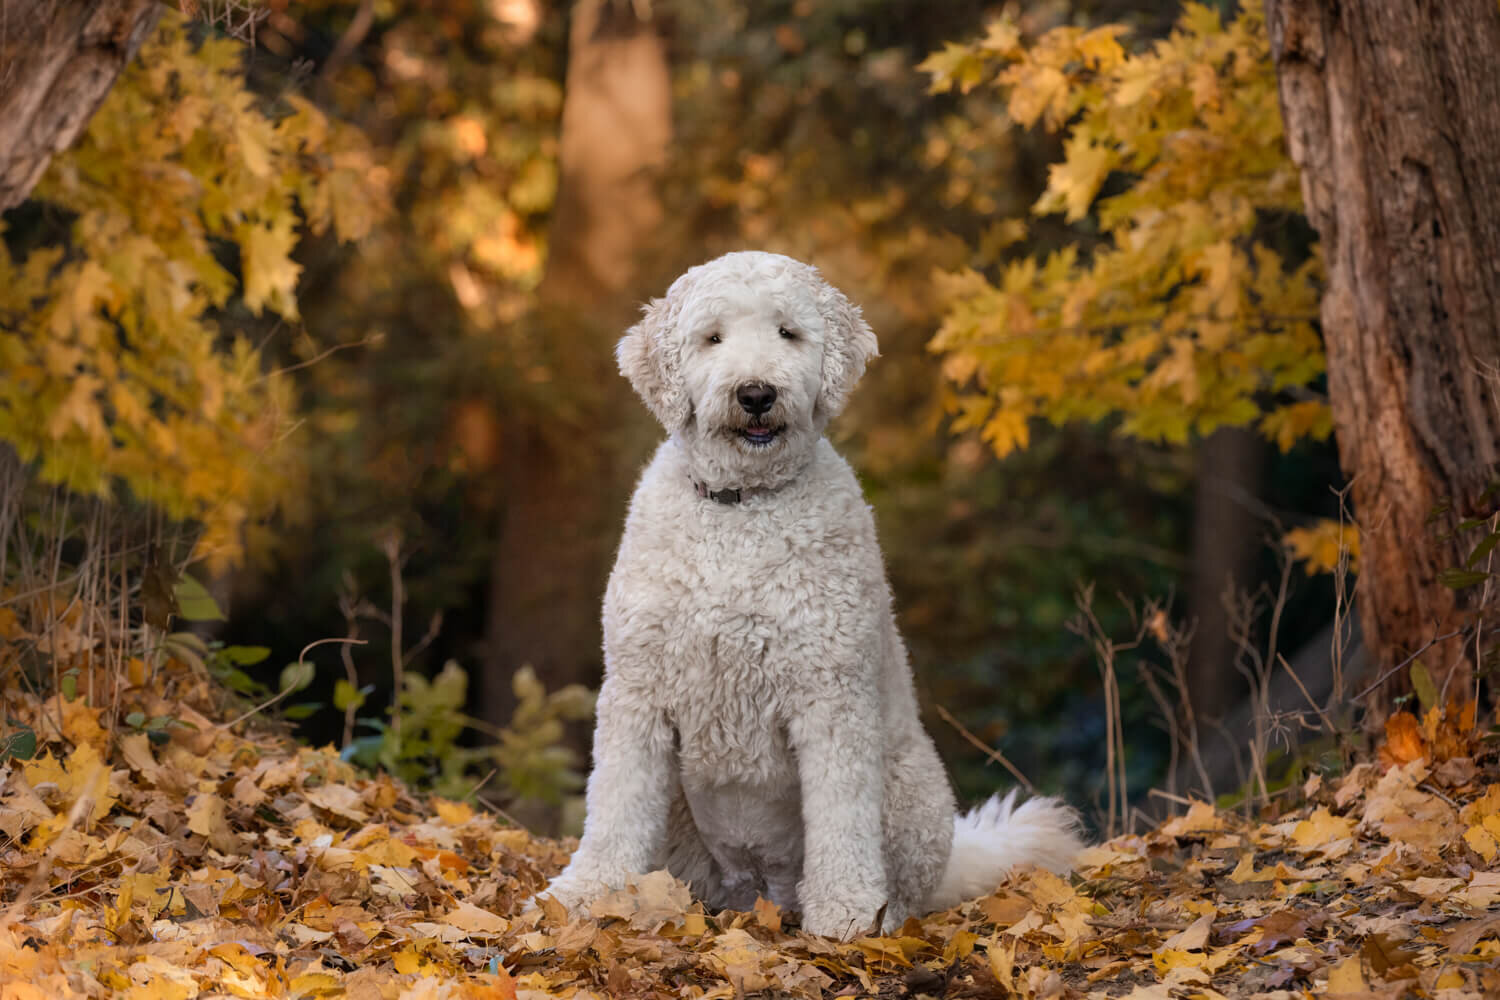 FALL FOLIAGE PROVIDES A FRAME FOR THIS GOLDENDOODLE